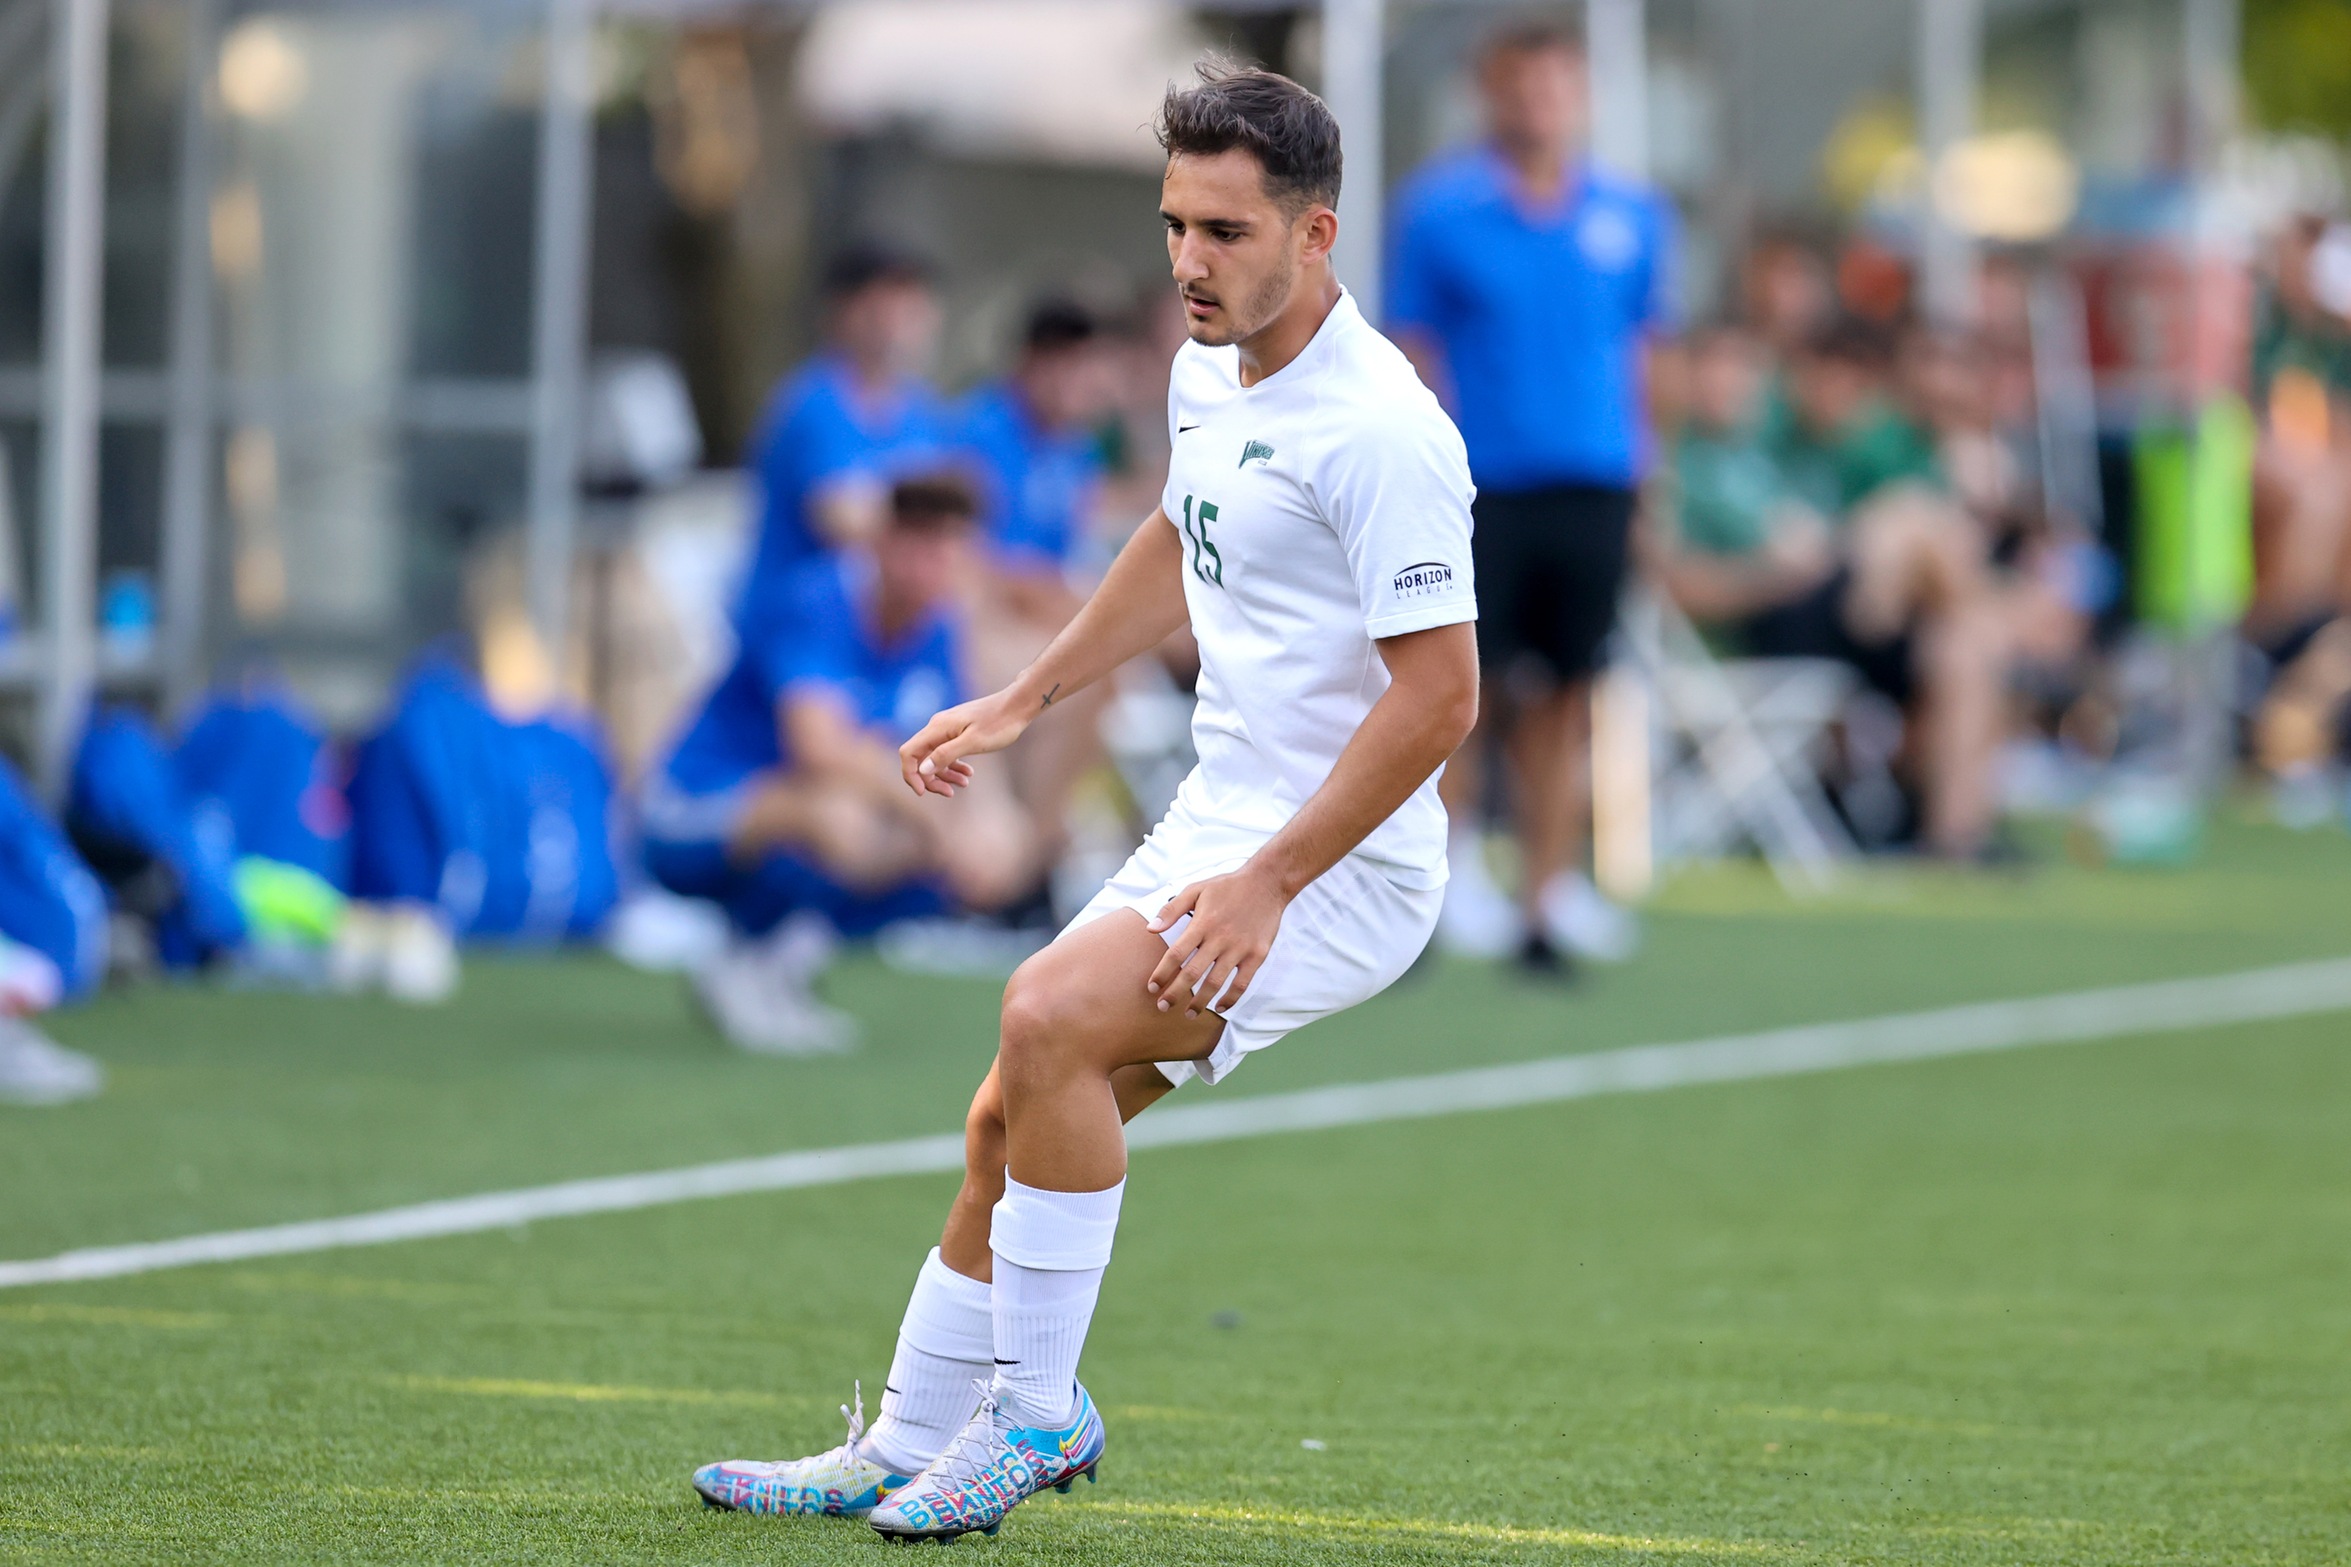 Kawecki Scores the Game-Winner in Double Overtime as Cleveland State Men's Soccer Defeats RMU